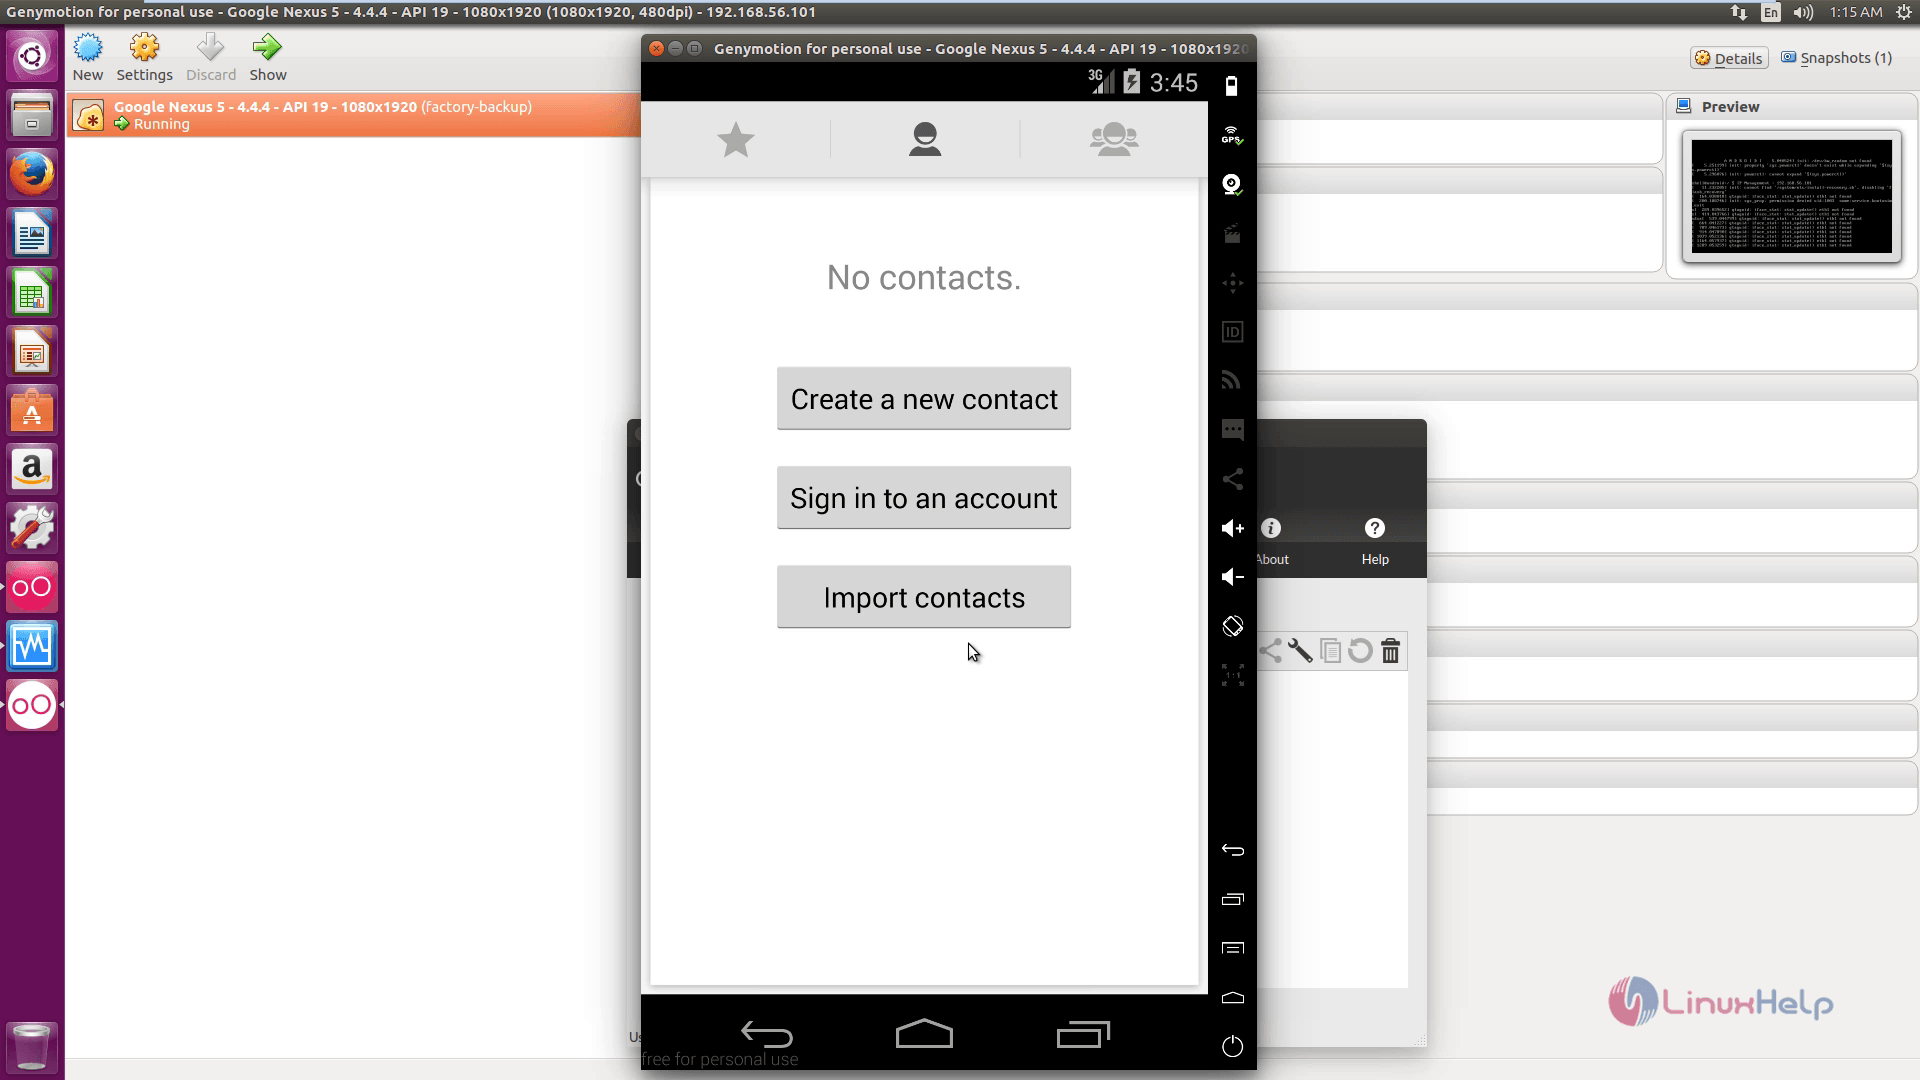 run-Android-Apps-Ubuntu-Genymotion-Emulator-testing-and-presentation-add-contacts